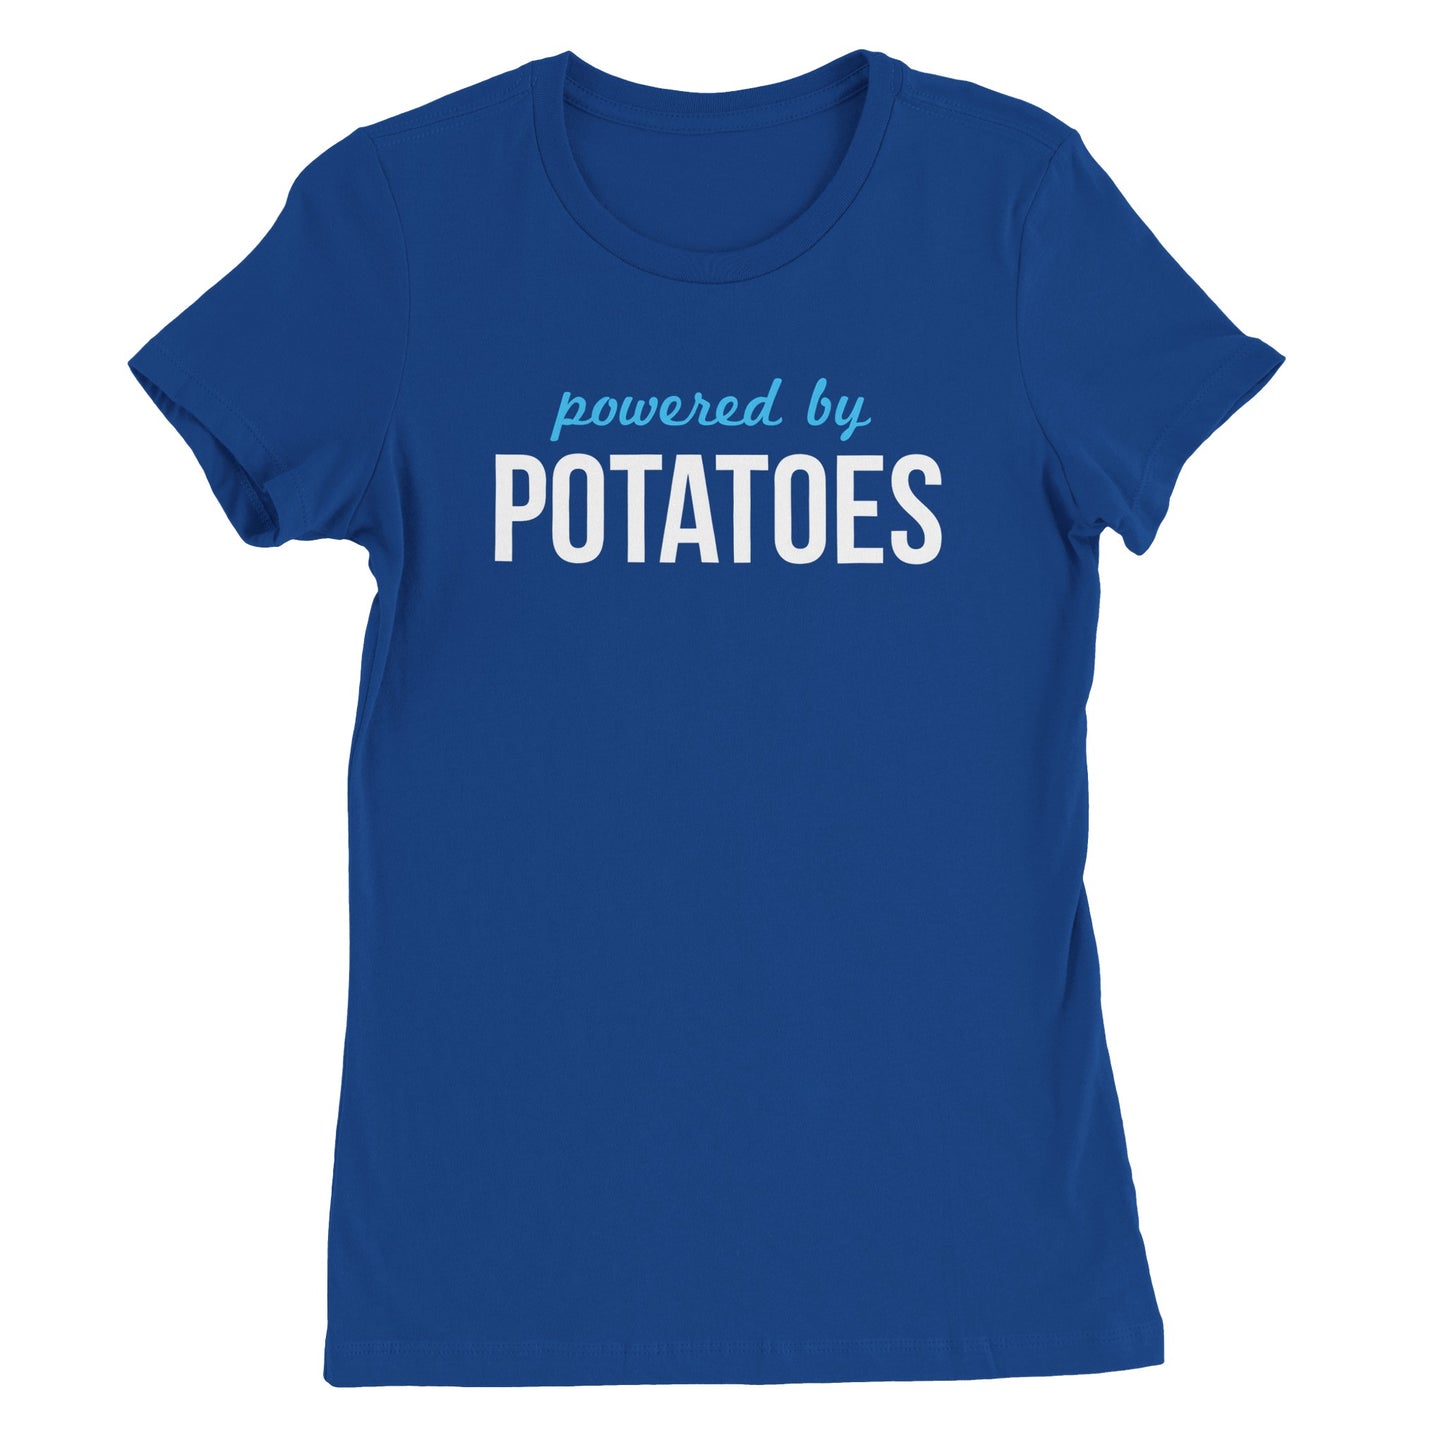 Powered by Potatoes - Women's Style (Women's run small - get one size up from normal unisex)